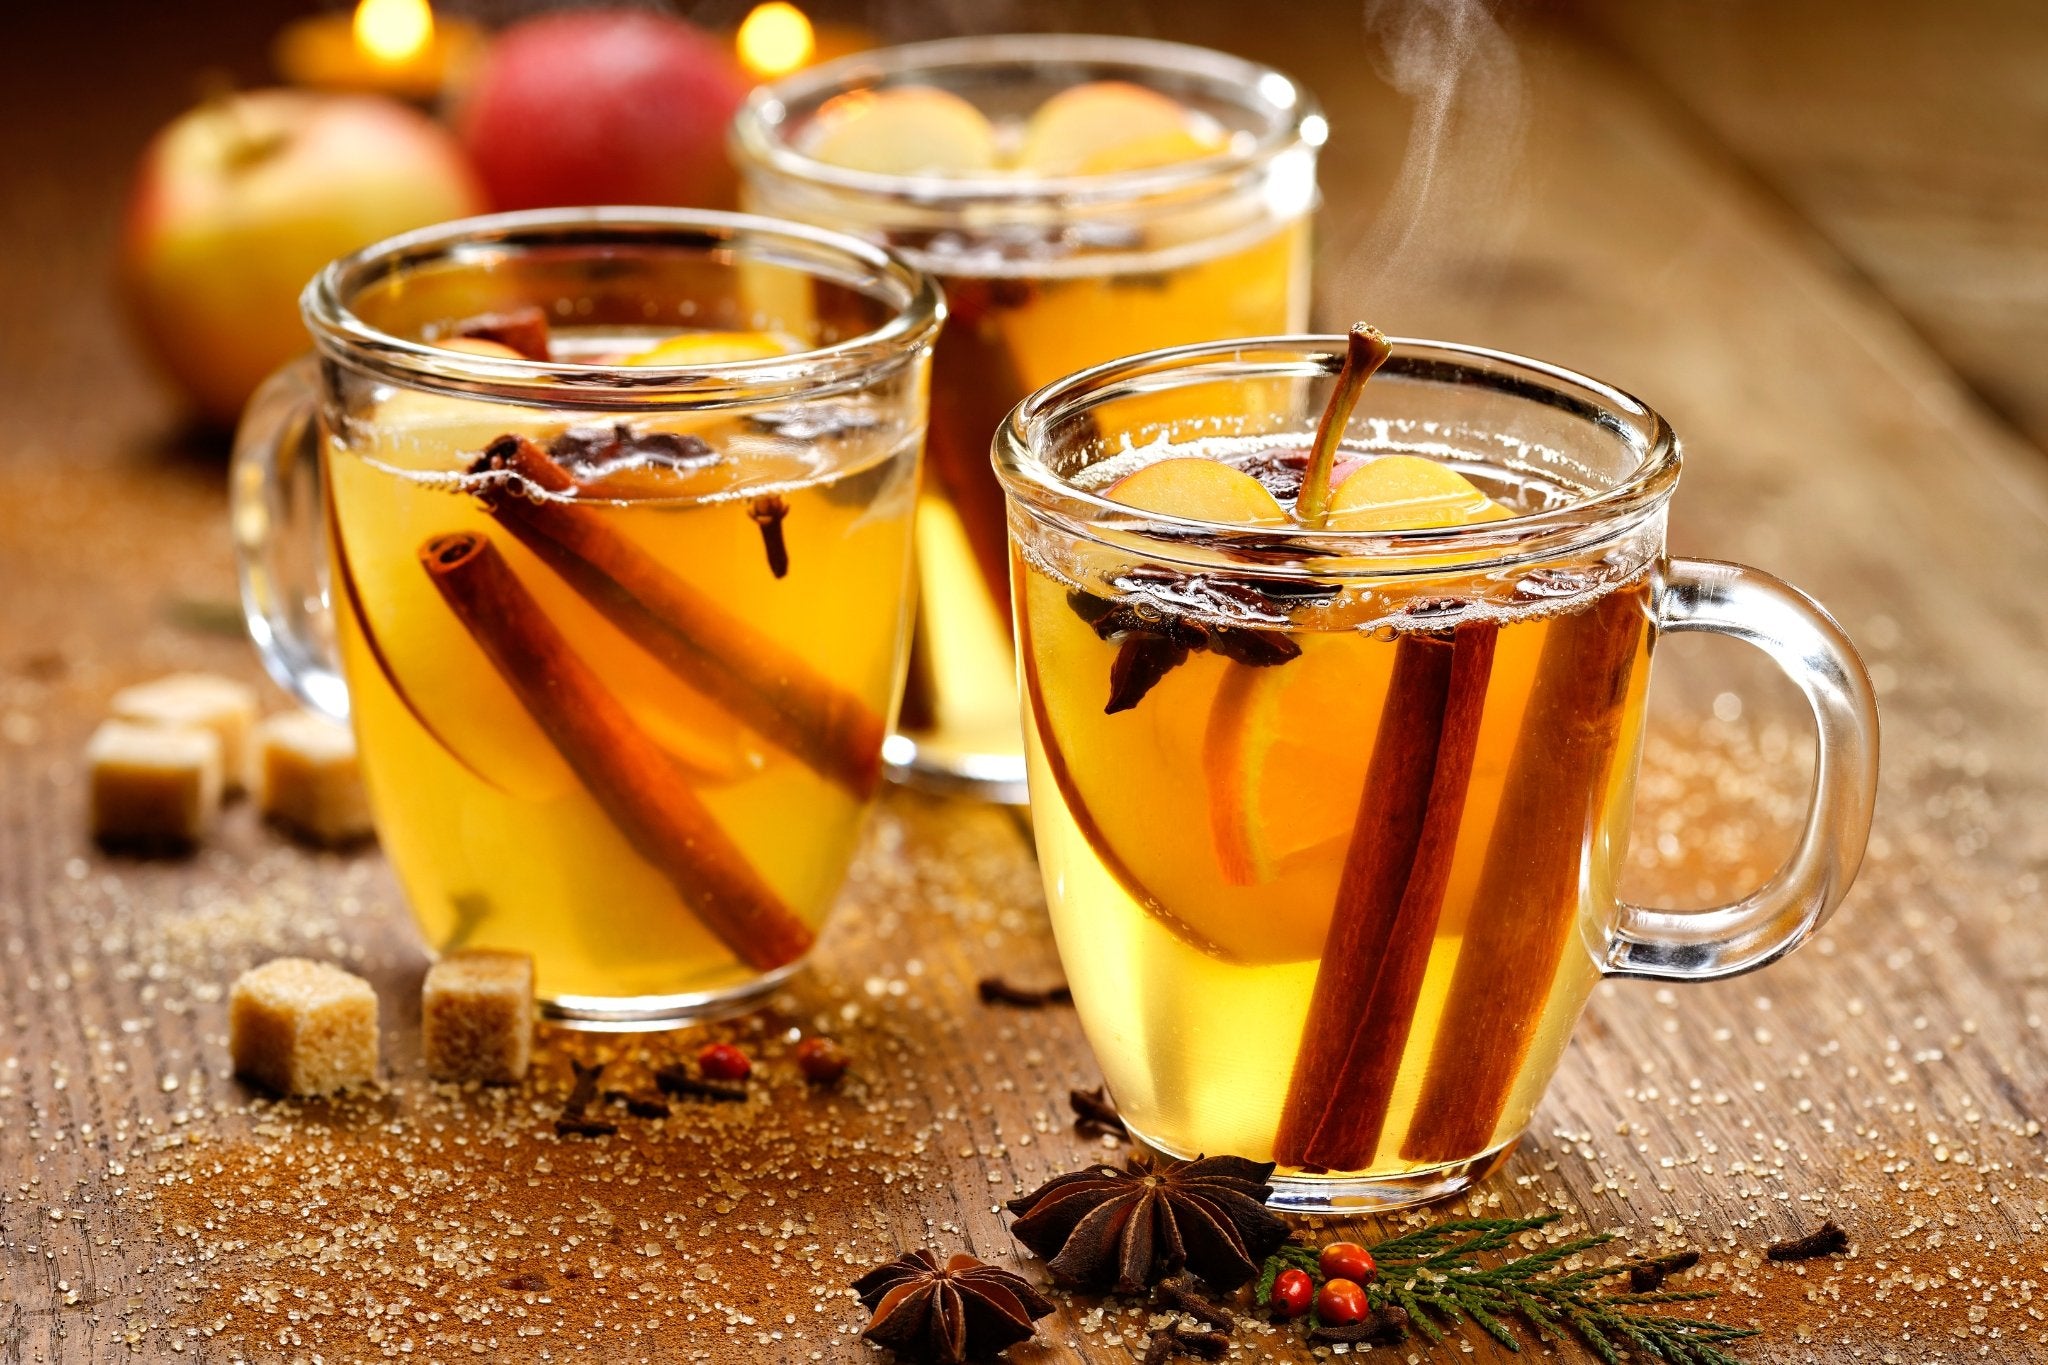 Make This Yummy Christmas Chai Spiced Cranberry Cider For Your Next Holiday Get Together - Loose Leaf Tea Market